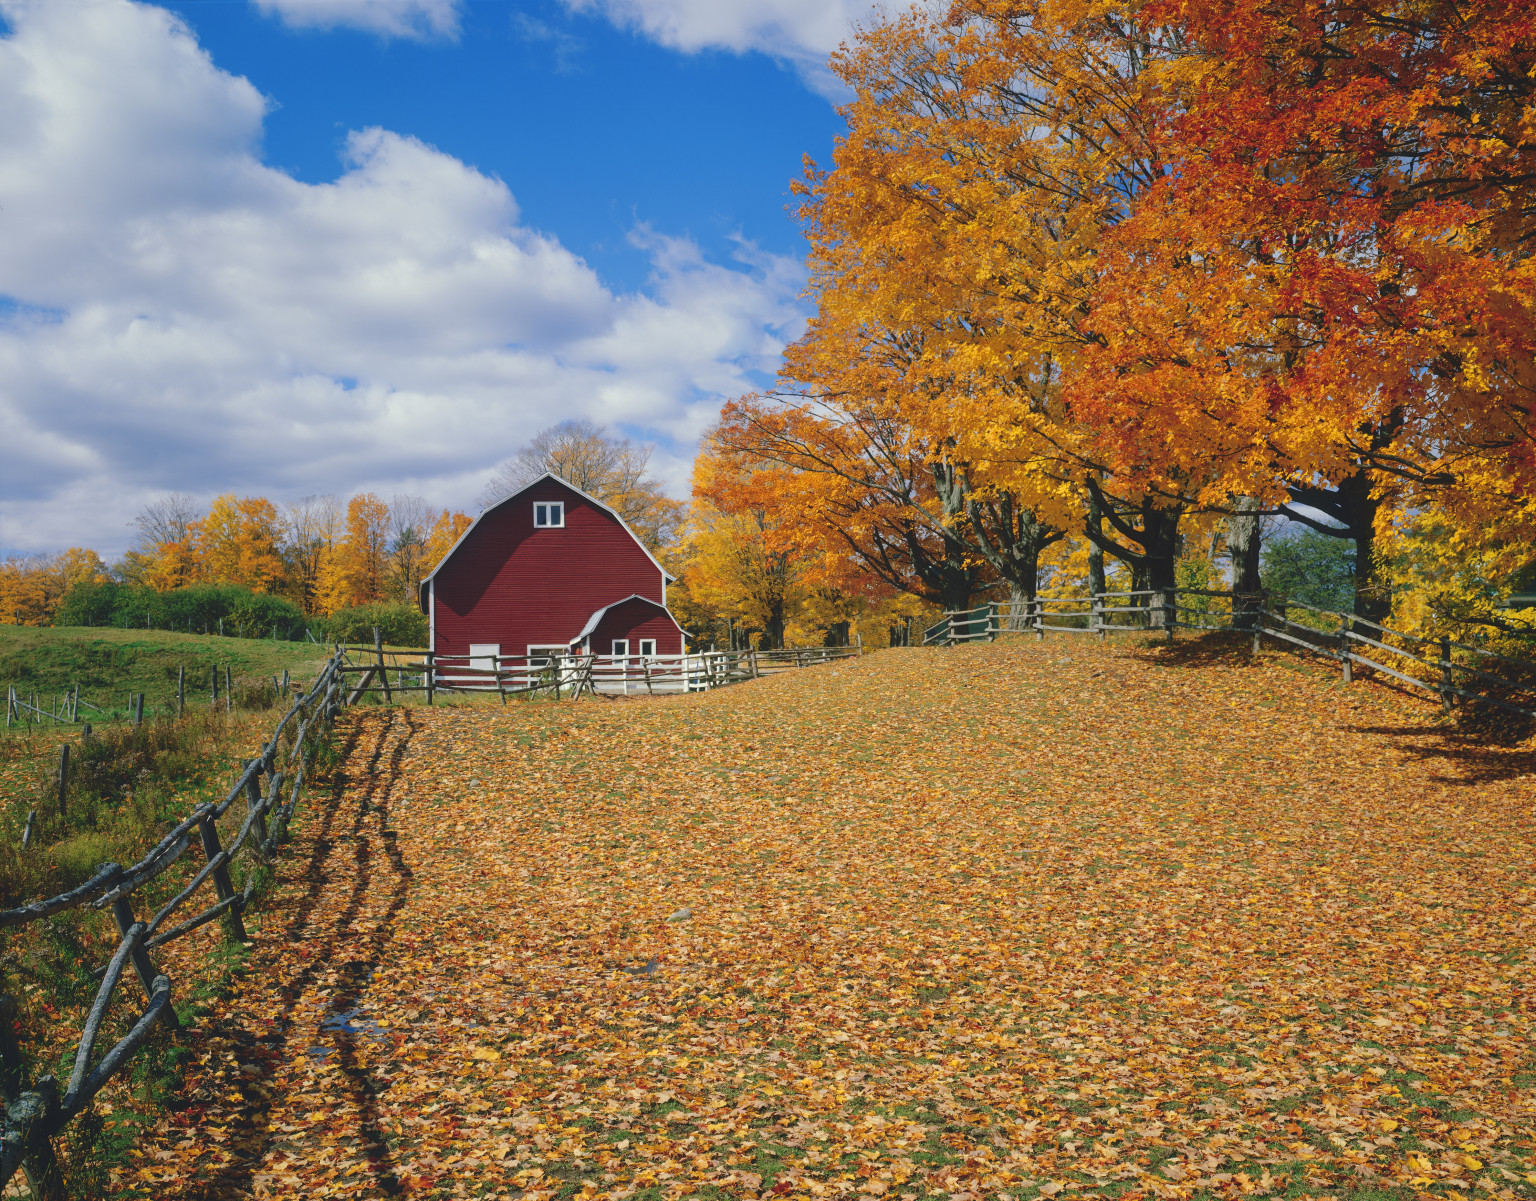 80% Of People Reorganize Their Home In Fall, So You Should Probably Get ...